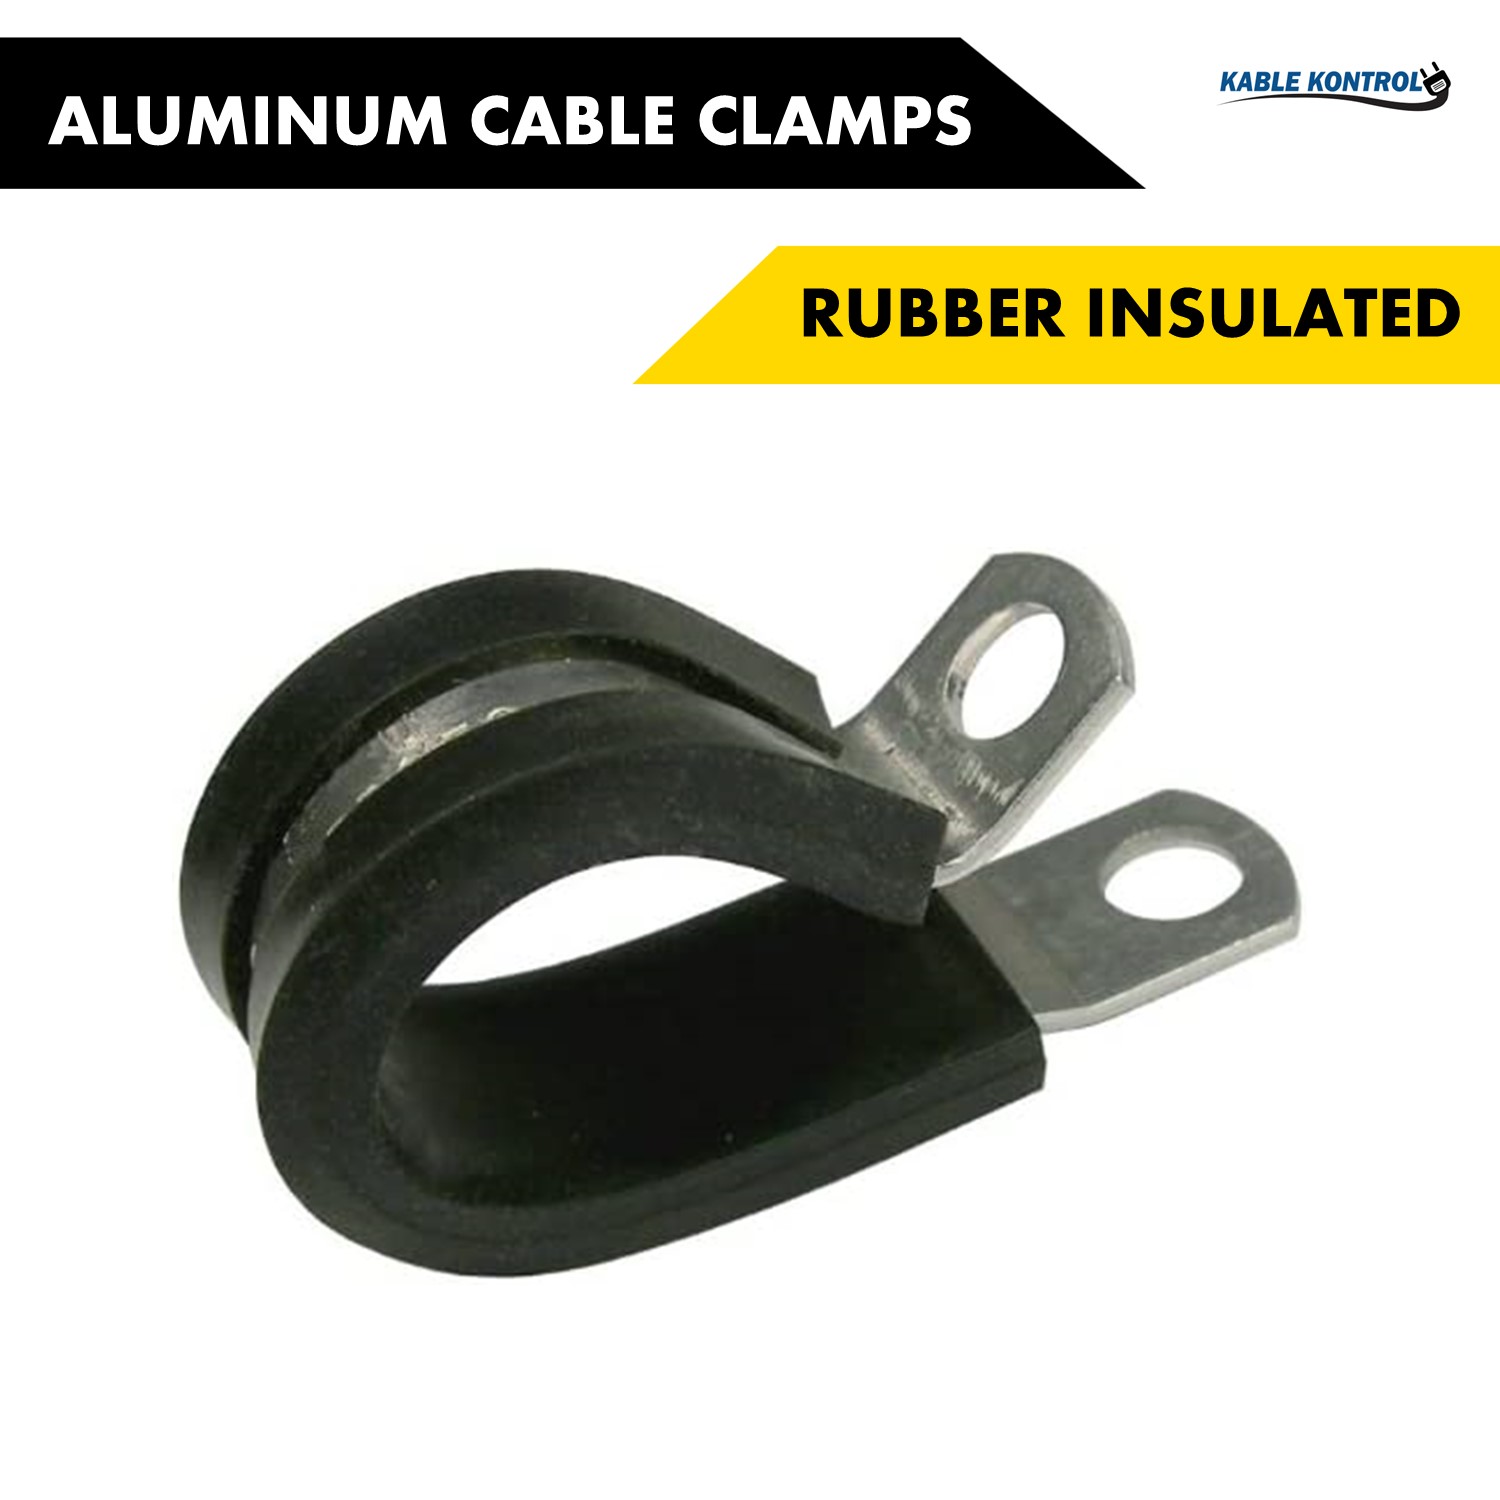 Aluminum Cable Clamps - Rubber Insulated Metal Wire Clamps